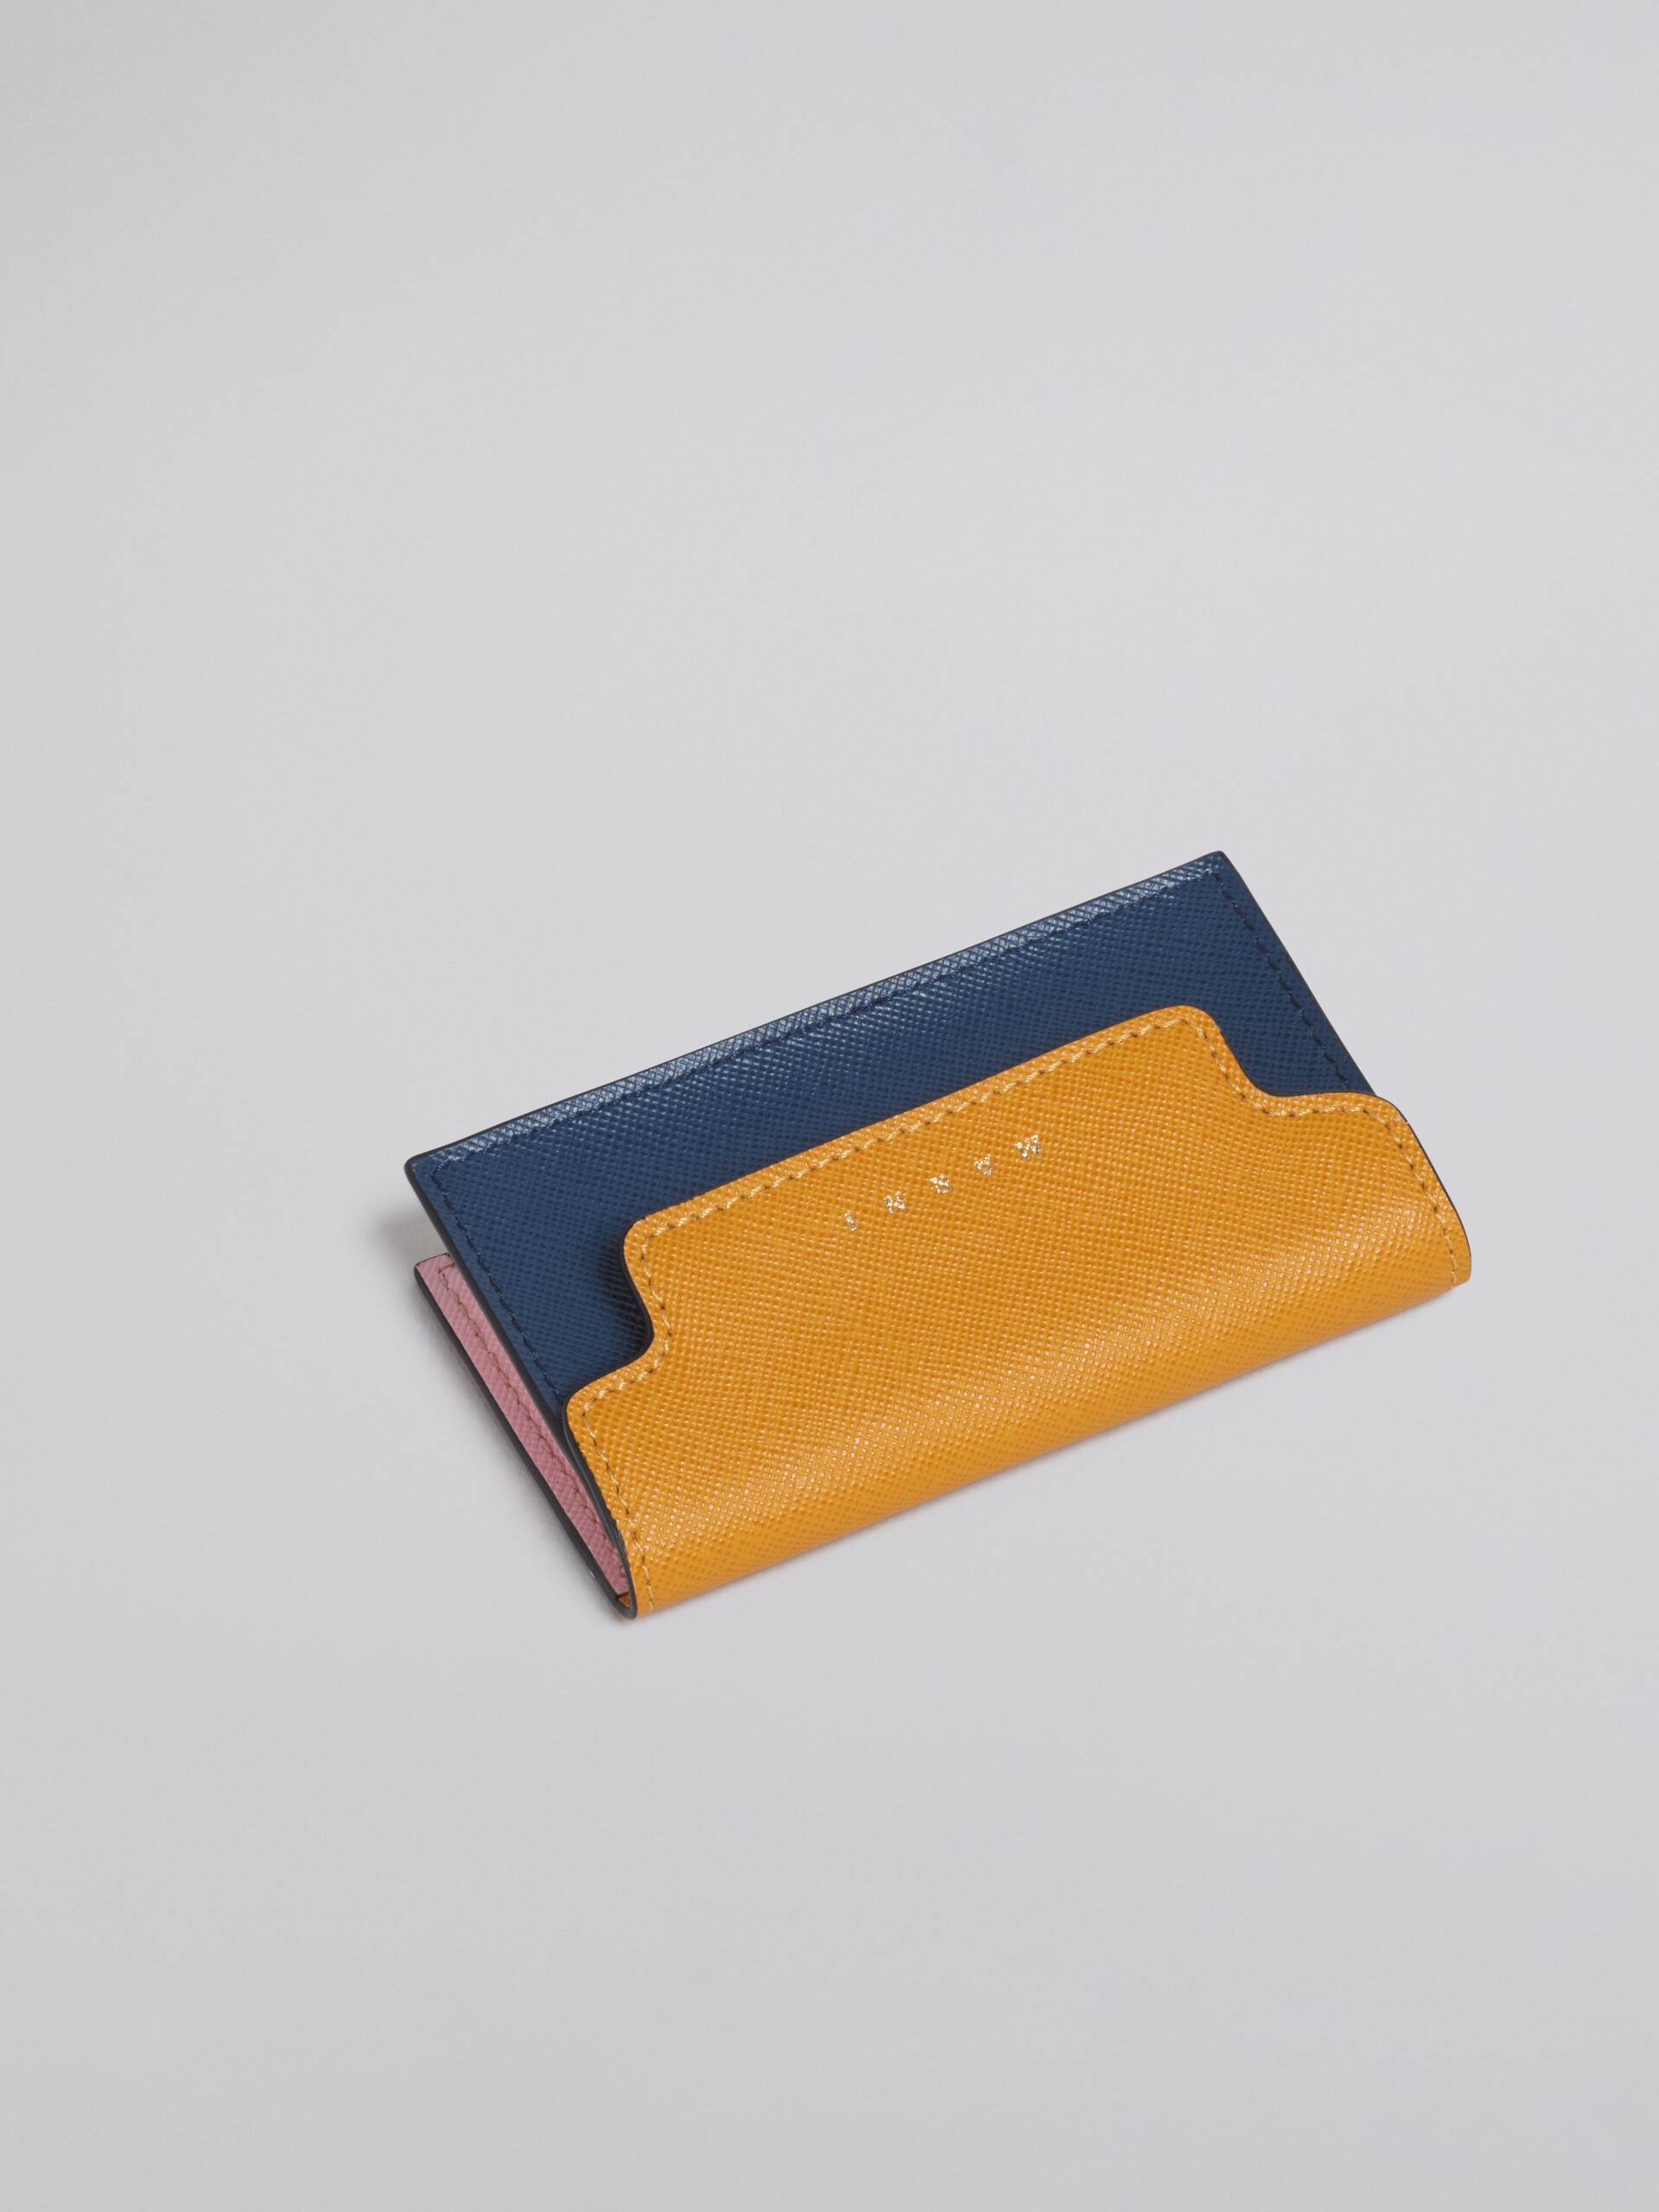 Orange pink and blue saffiano leather business card case - Wallets - Image 4